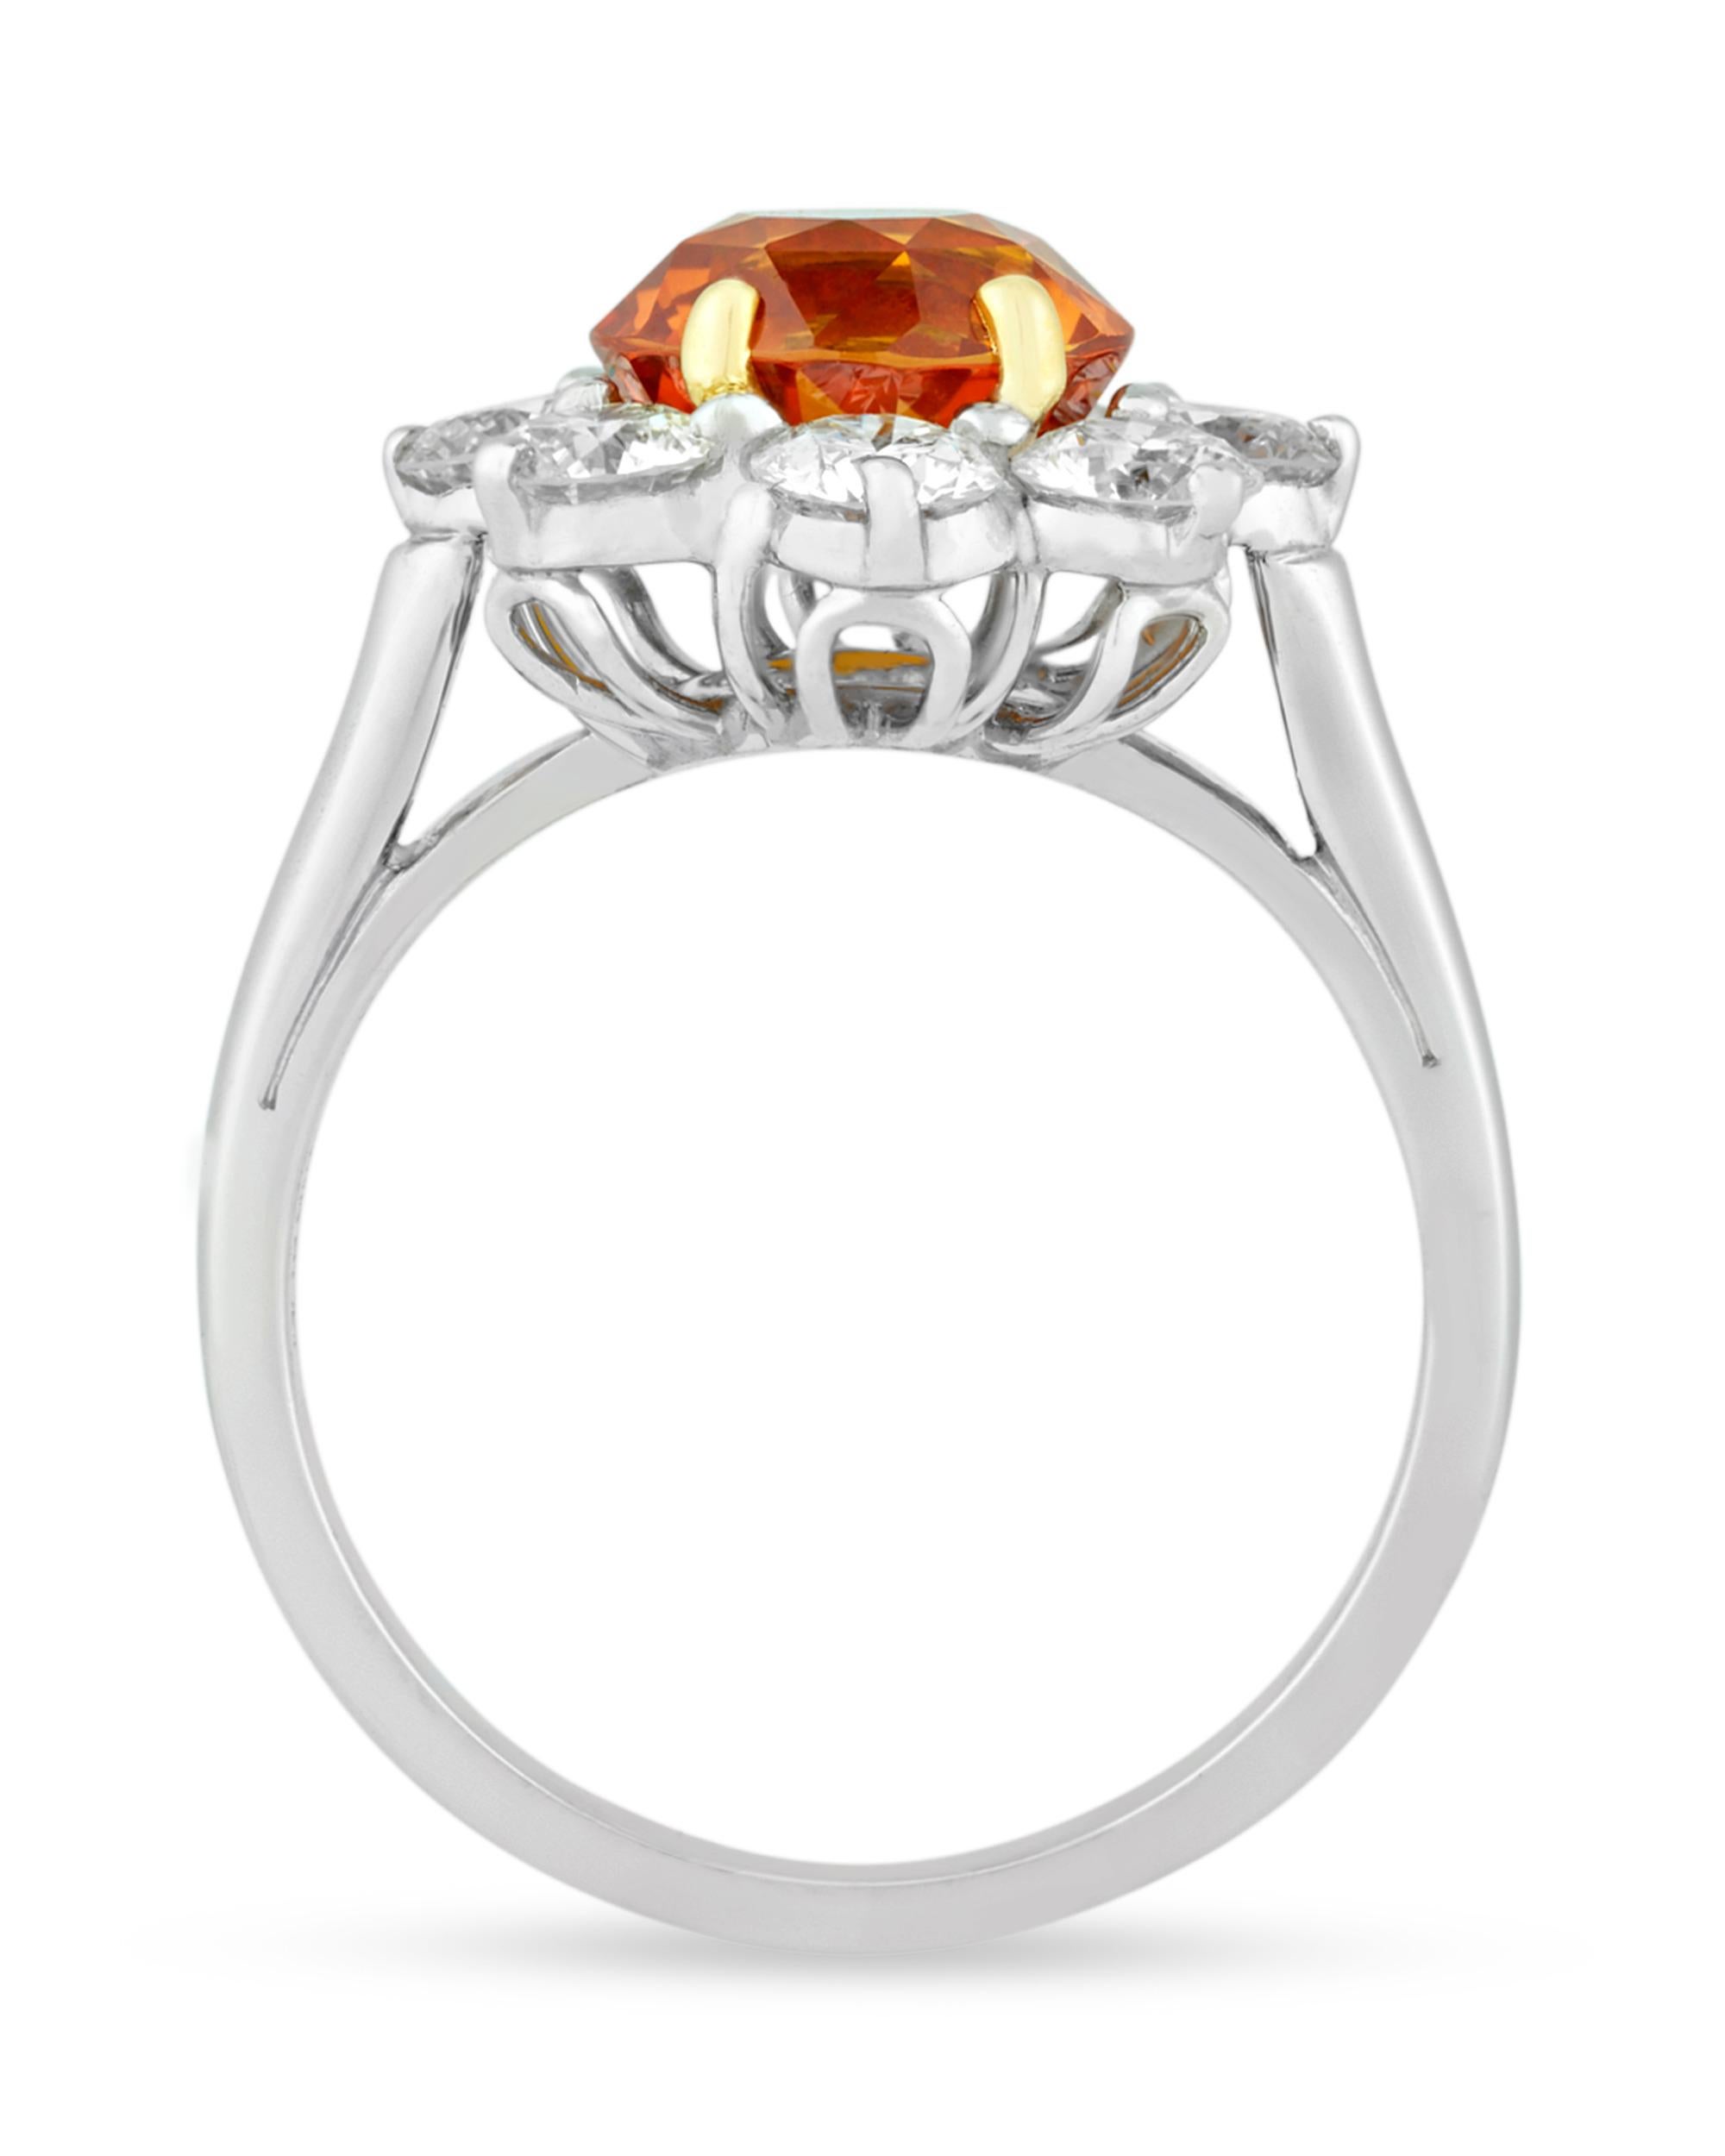 A fiery round, brilliant-cut sapphire weighing 3.13 carats forms the center of this sophisticated ring by beloved American jeweler Oscar Heyman. Certified by the Gemological Institute of America, the jewel displays a vivid orange hue. Encircled by